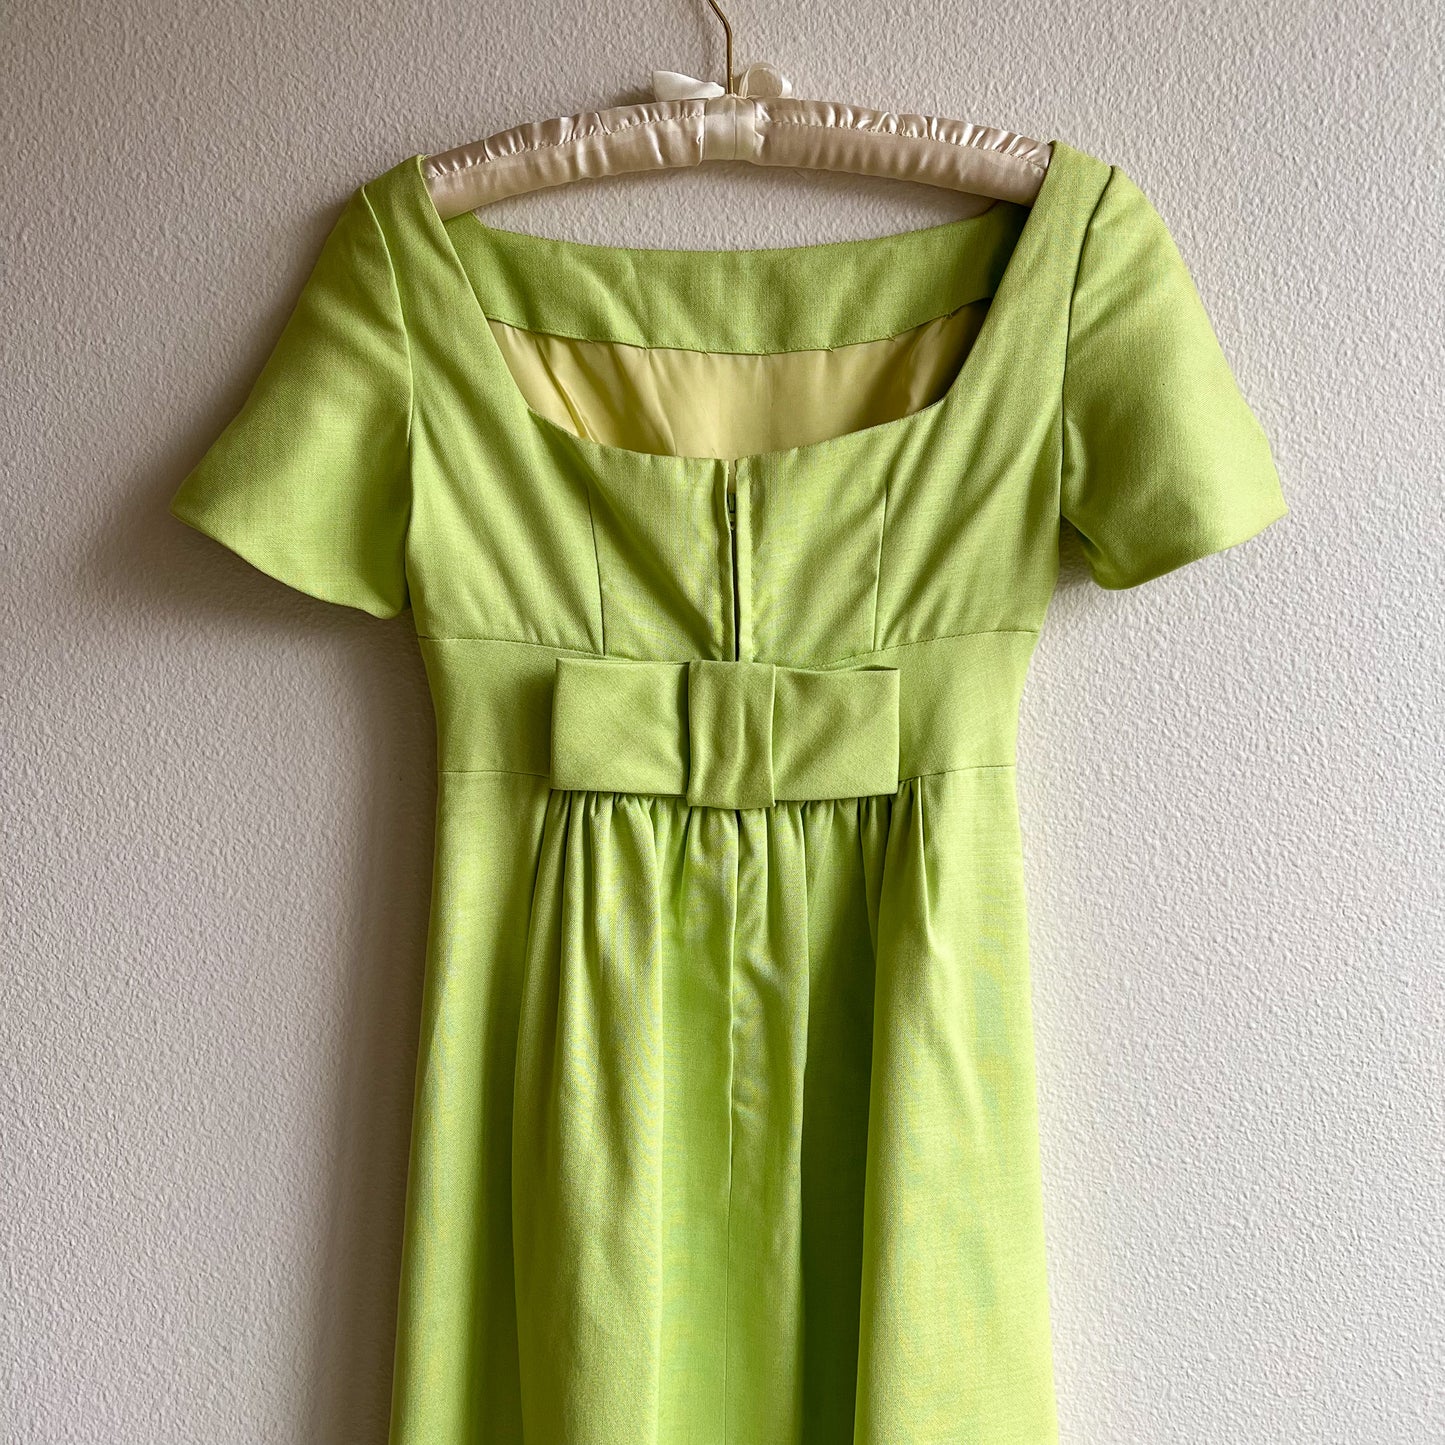 Darling 1960s Lime Green Cotton Gown With Bow (S)